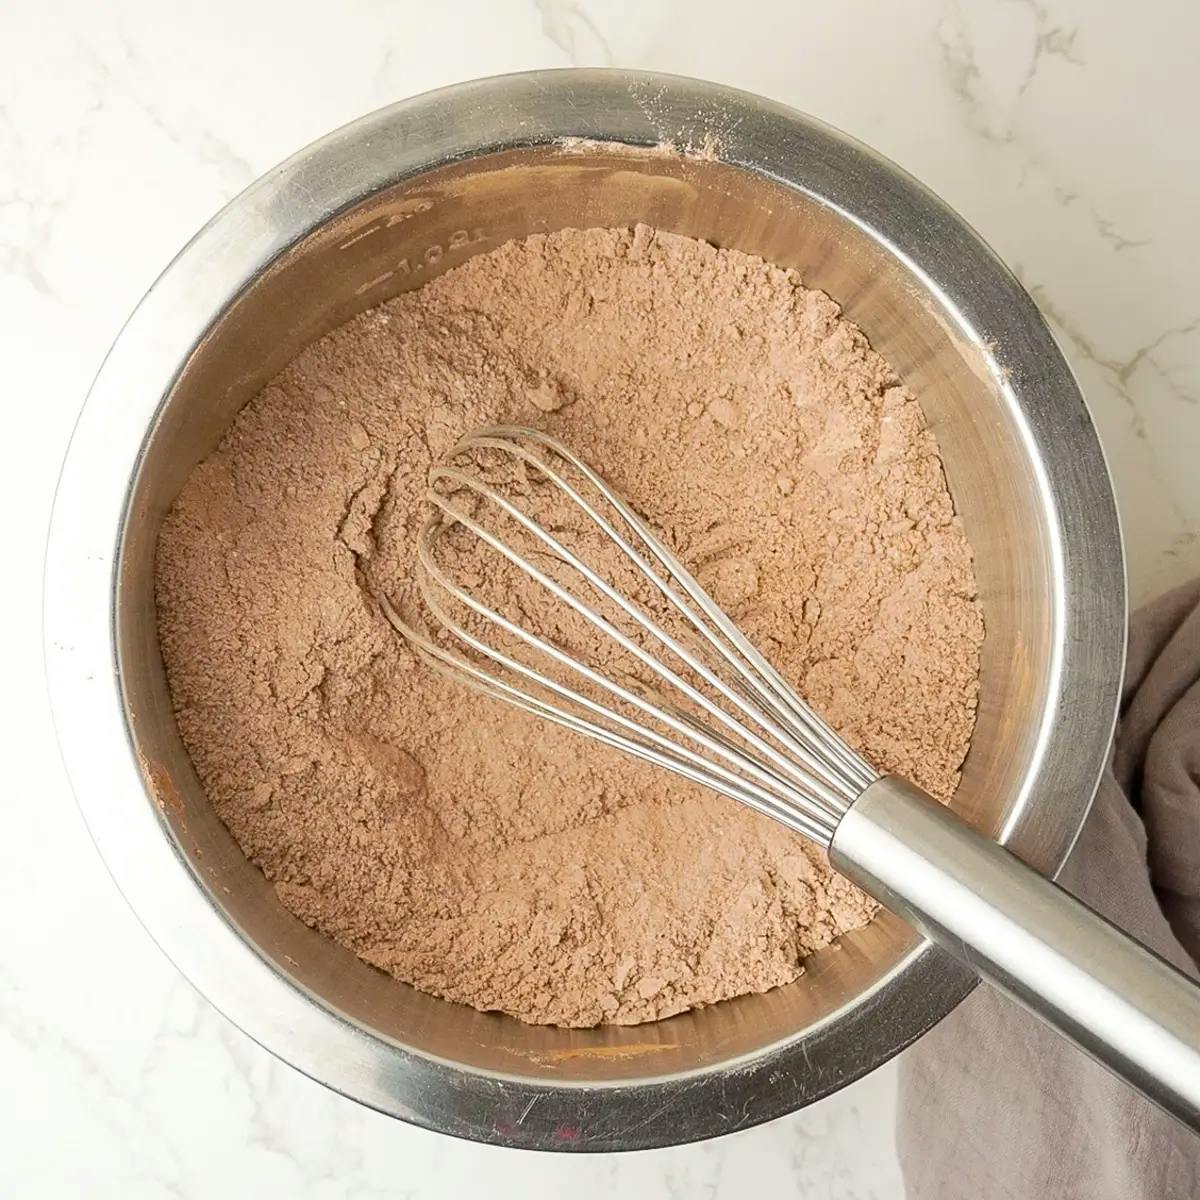 Cocoa, sugar, flour, and other dry ingredients in a bowl. Part of a recipe for Vegan Chocolate Orange Cake.